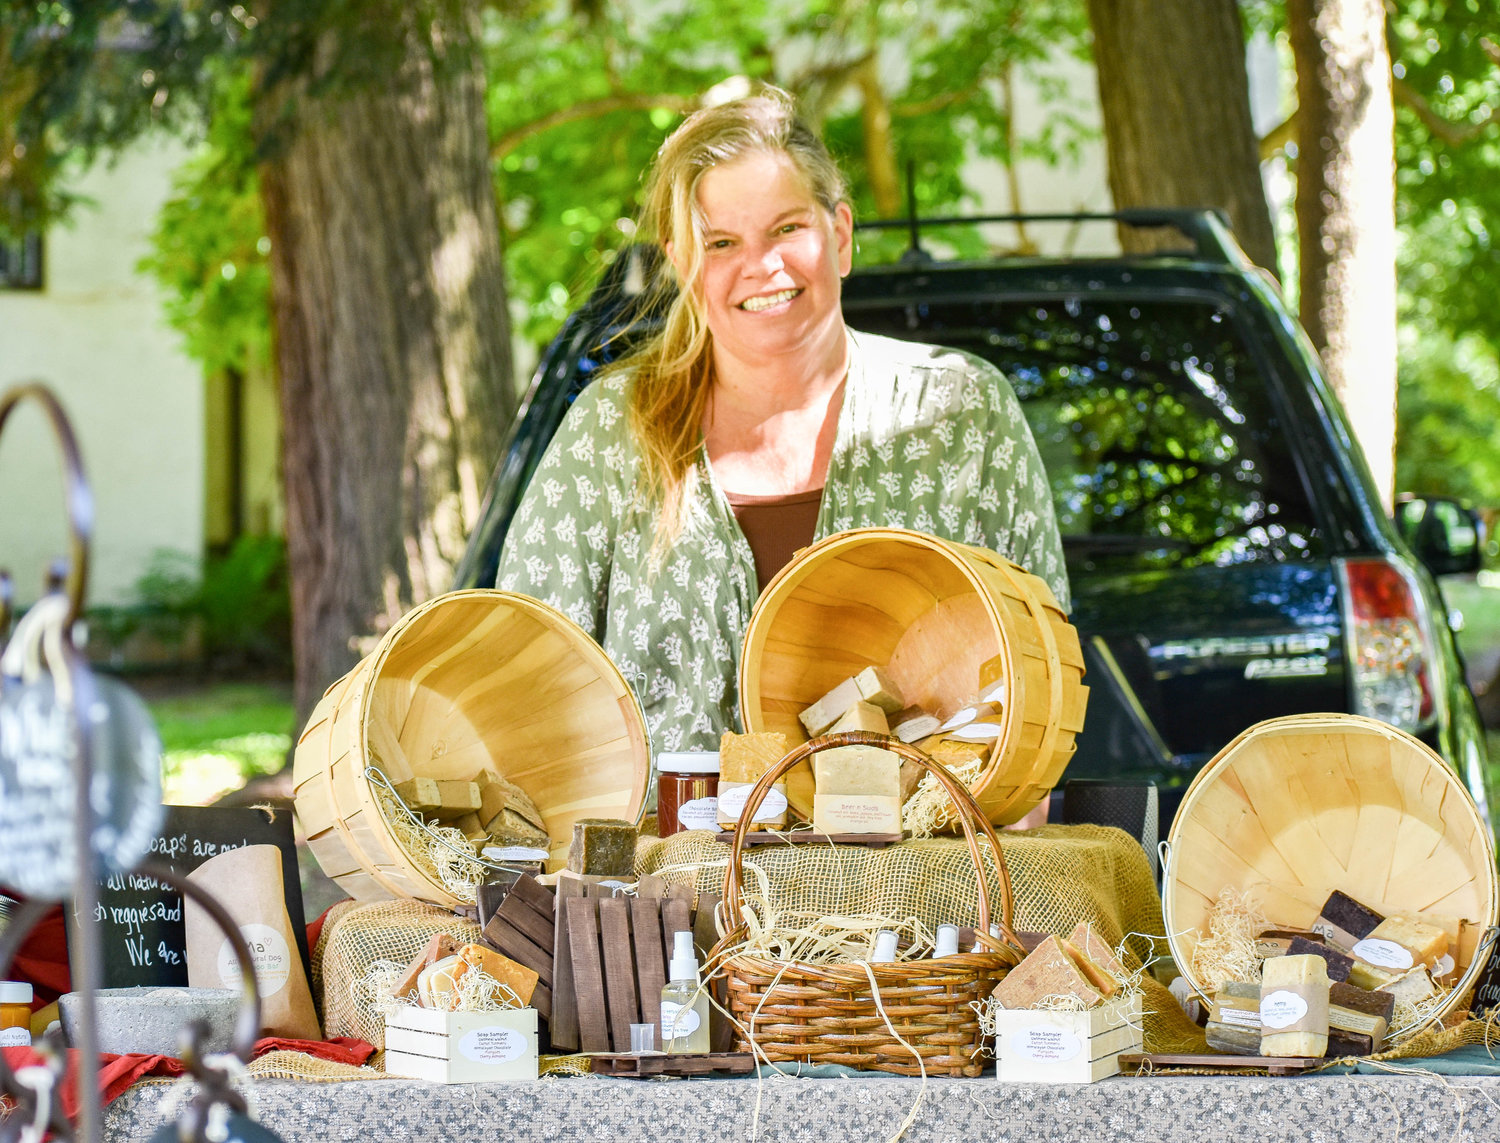 Amy Jakacki makes natural soaps, bug sprays, and more through her business, Ma’s Soaps.